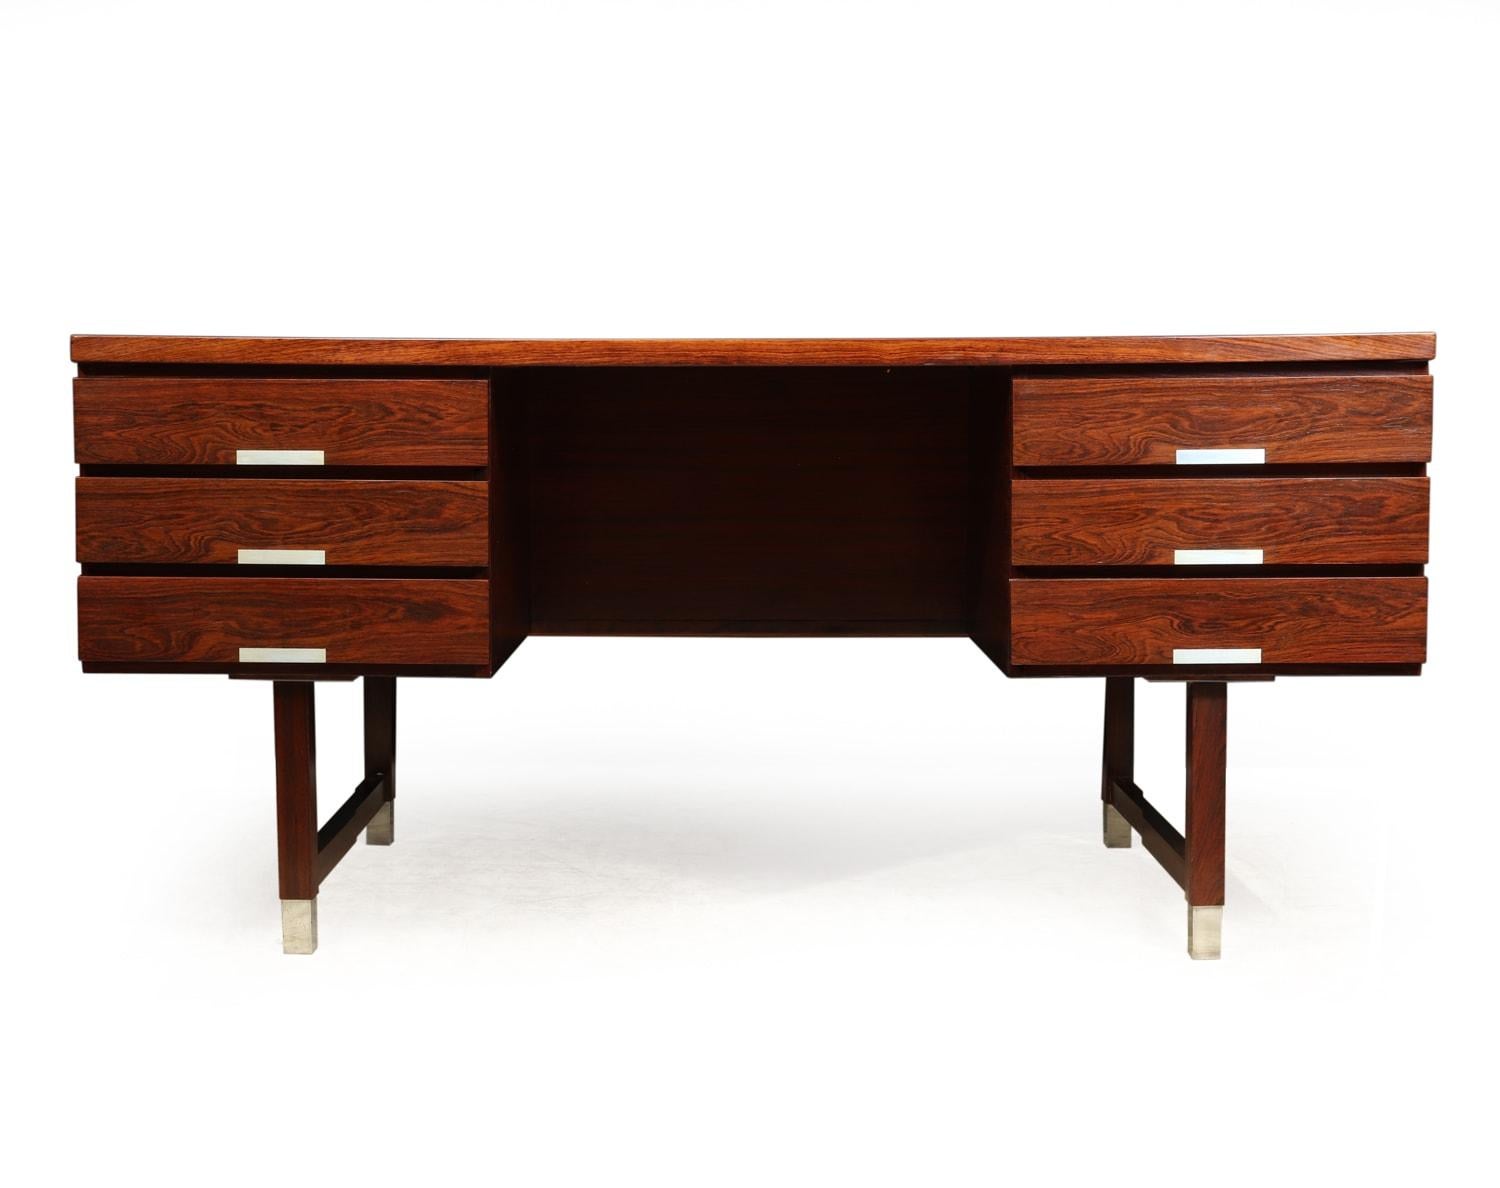 Midcentury rosewood EP401 desk by Kai Kristiansen, circa 1960.
A very stylish desirable rosewood desk produced in the 1960s, having six drawers and open bookshelf to the back making it completely freestanding. Aluminium handles and feet tips, in